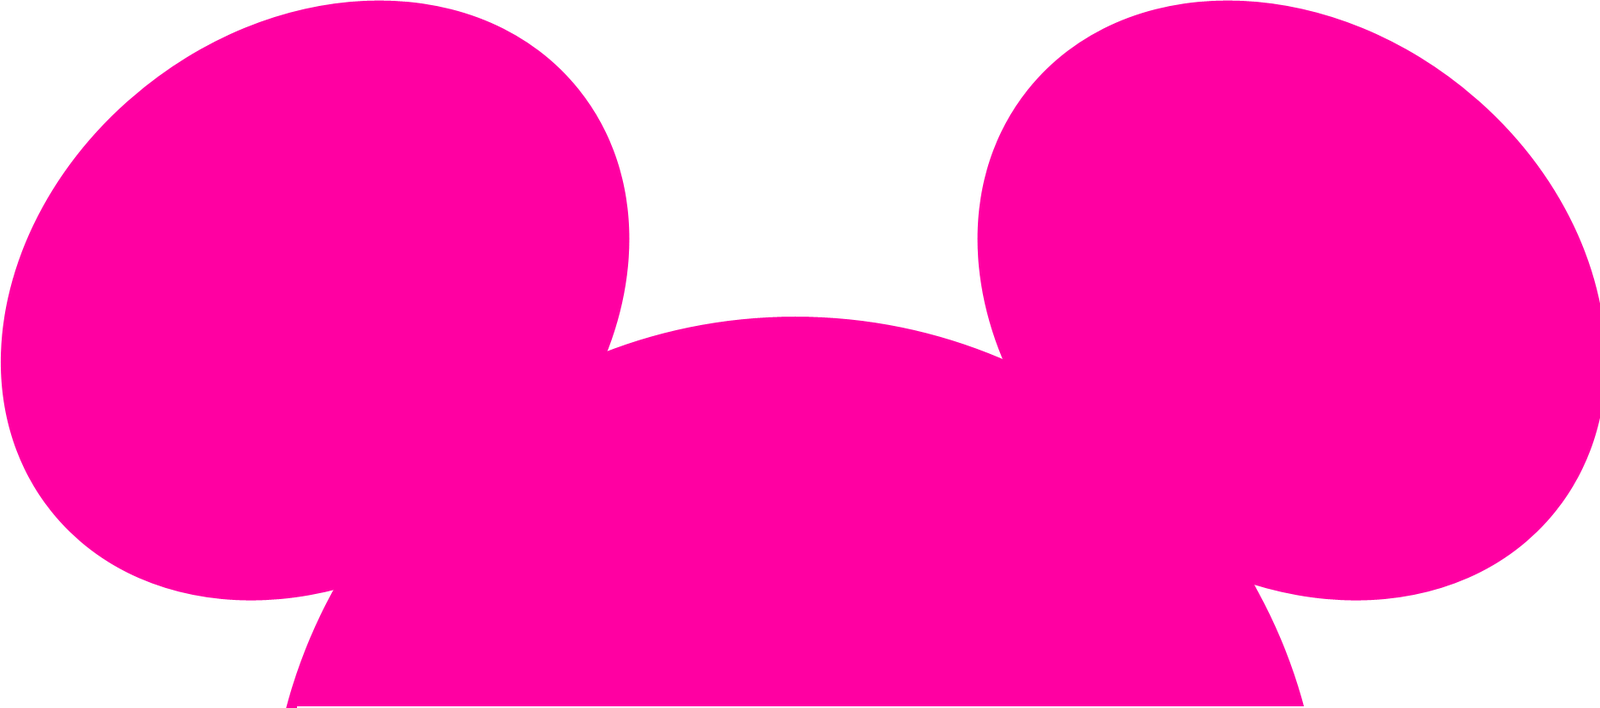 Minnie Mouse Ears Pink Silhouette PNG